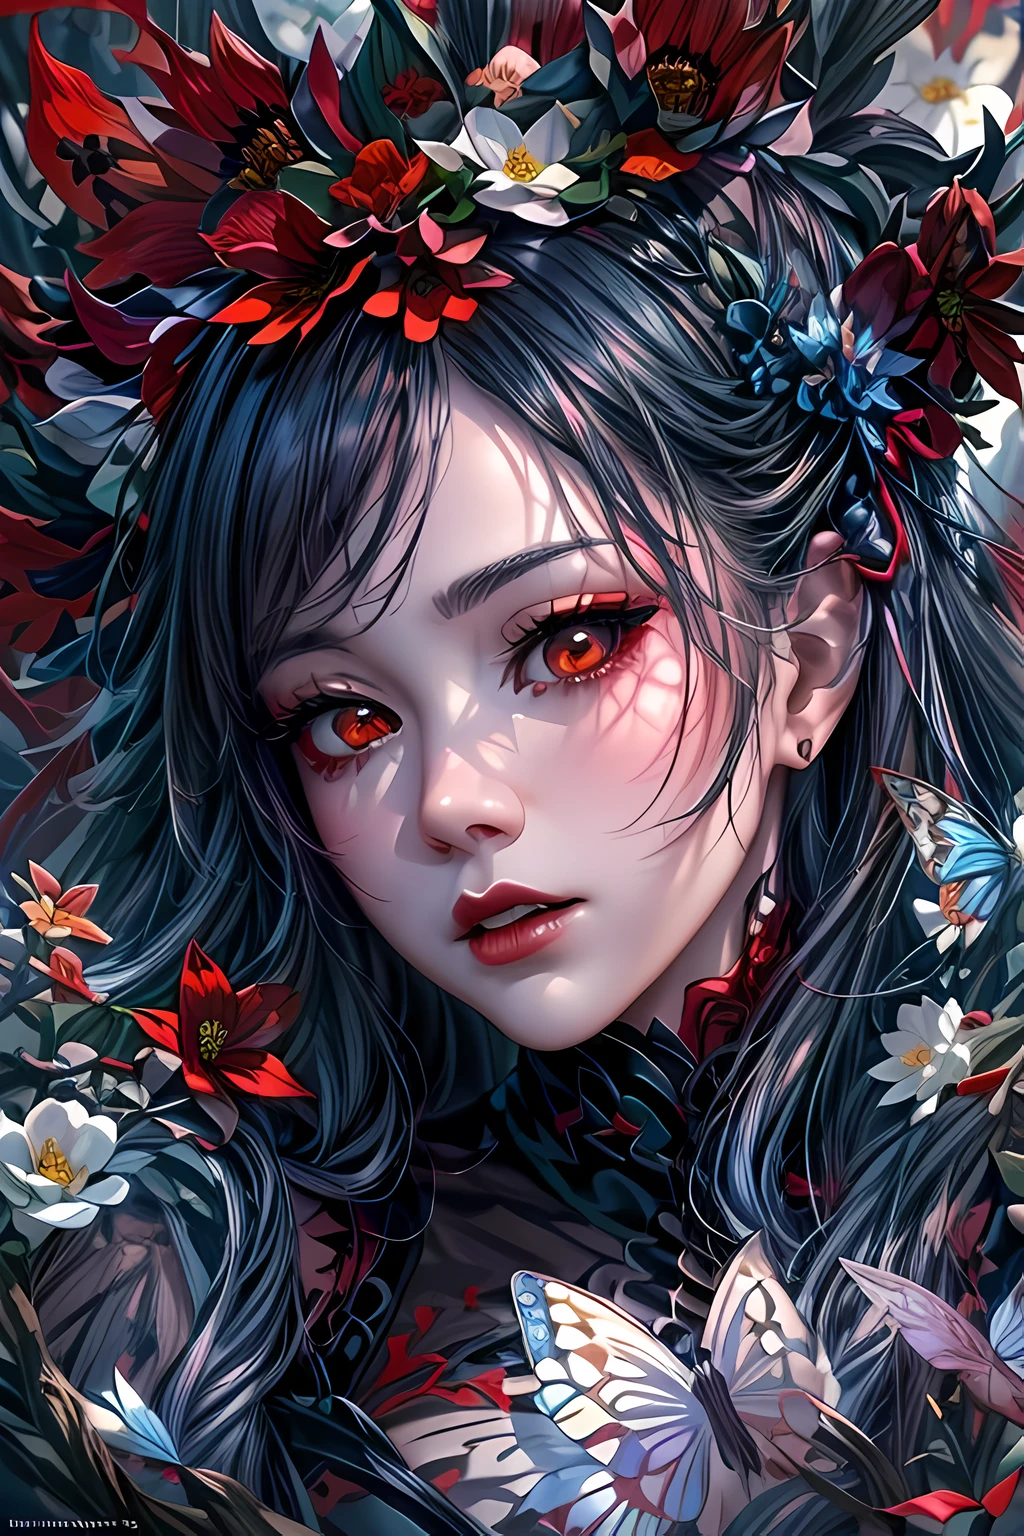 high details, best quality, 16k, RAW, [best detailed], masterpiece, best quality, (extremely detailed), full body, ultra wide shot, photorealistic, dark fantasy art, goth art, RPG art, D&D art, a picture of a dark female fairy resting in a flower meadow, extremely beautiful fairy, ultra feminine (intense details, Masterpiece, best quality), best detailed face (intense details, Masterpiece, best quality), having wide butterfly wings, spread butterfly wings (intense details, Masterpiece, best quality), dark colors wings (intense details, Masterpiece, best quality), (blue) hair, long hair, shinning hair, flowing hair, shy smile, innocent smile, (red: 1.3) eyes, dark red lips, wearing [red] dress latex corset (intense details, Masterpiece, best quality), dynamic elegant shirt, chocker, wearing high heels, in dark colored flower meadow (intense details, Masterpiece, best quality), (red flowers: 1.2) , (black flowers: 1.2), (white flowers: 1.2), (blue flowers: 1.3) [extreme many flowers] (intense details, Masterpiece, best quality), dark colorful flowers (intense details, Masterpiece, best quality), flower meadow in a dark goth field background, dim light, cinematic light, High Detail, Ultra High Quality, High Resolution, 16K Resolution, Ultra HD Pictures, 3D rendering Ultra Realistic, Clear Details, Realistic Detail, Ultra High Definition, DonMF41ryW1ng5XL